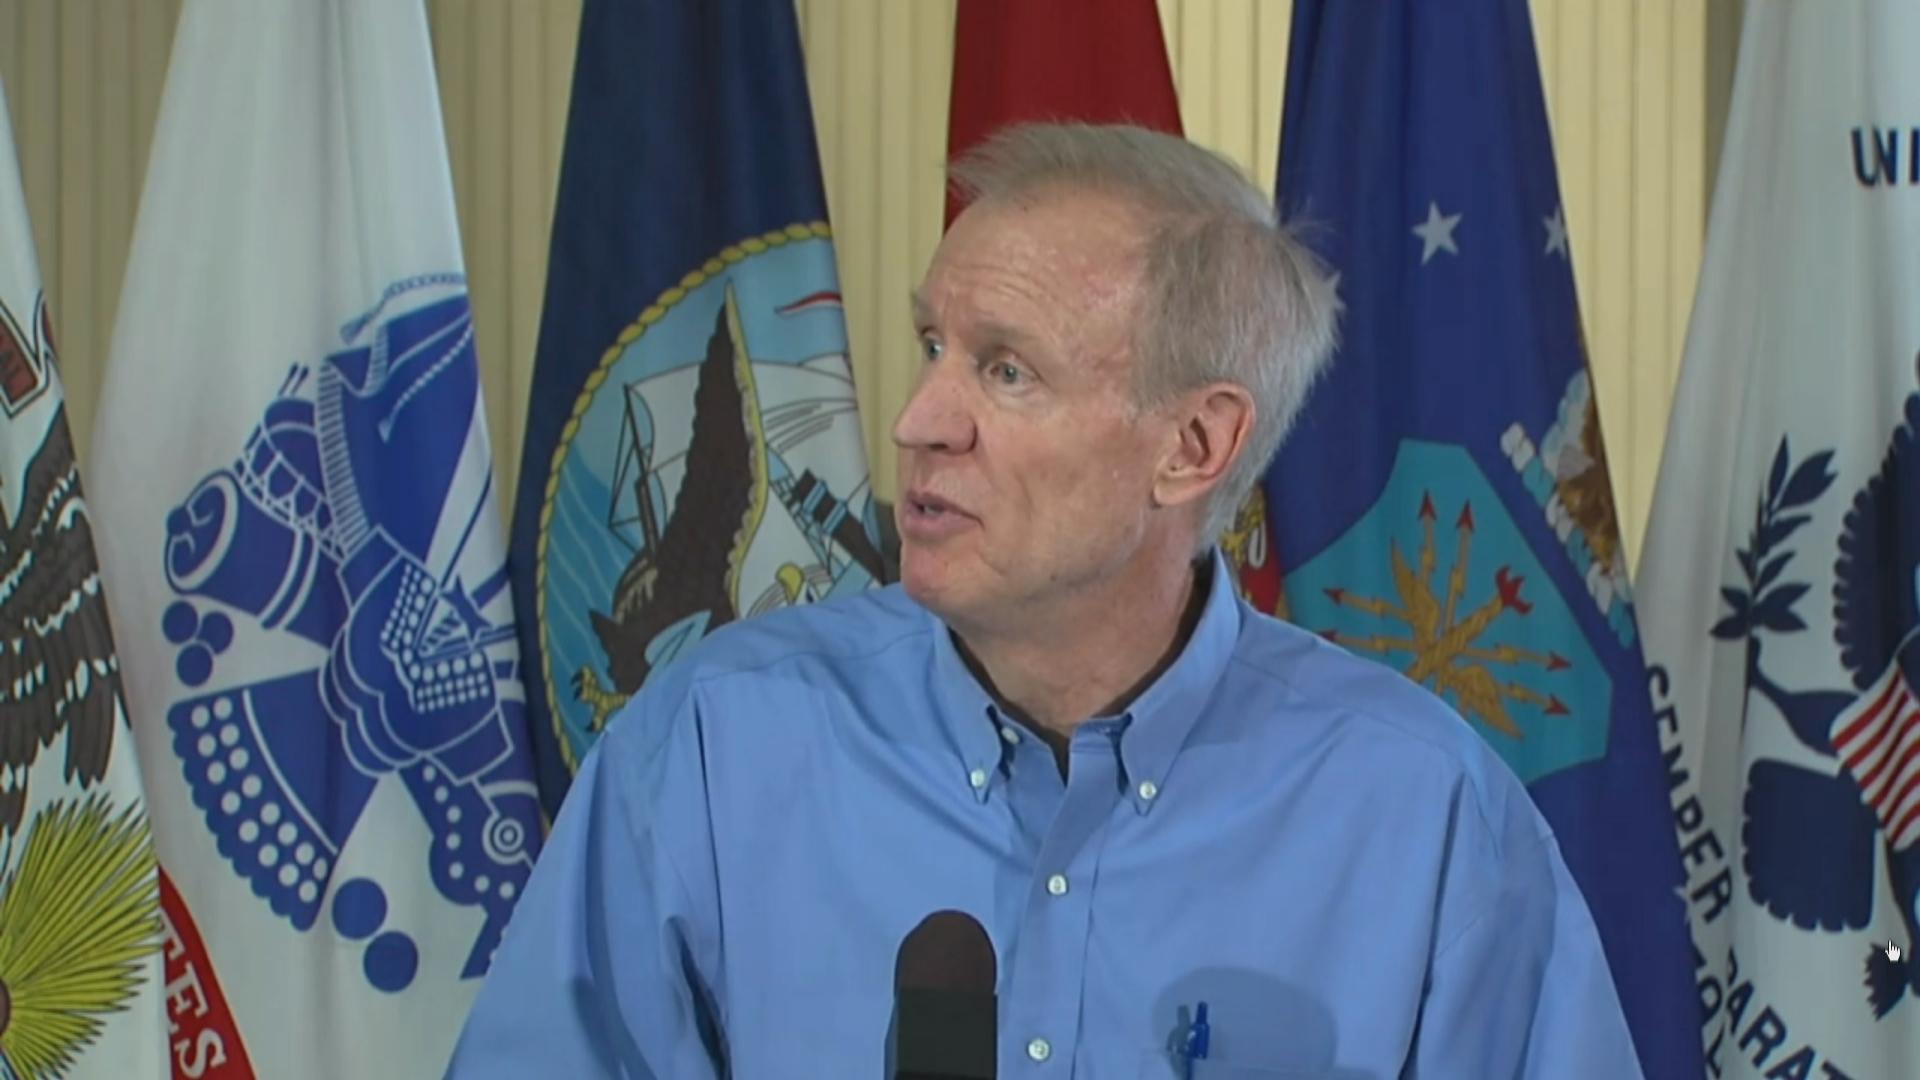 Gov. Bruce Rauner speaks about his four-point plan Wednesday. (Chicago Tonight)